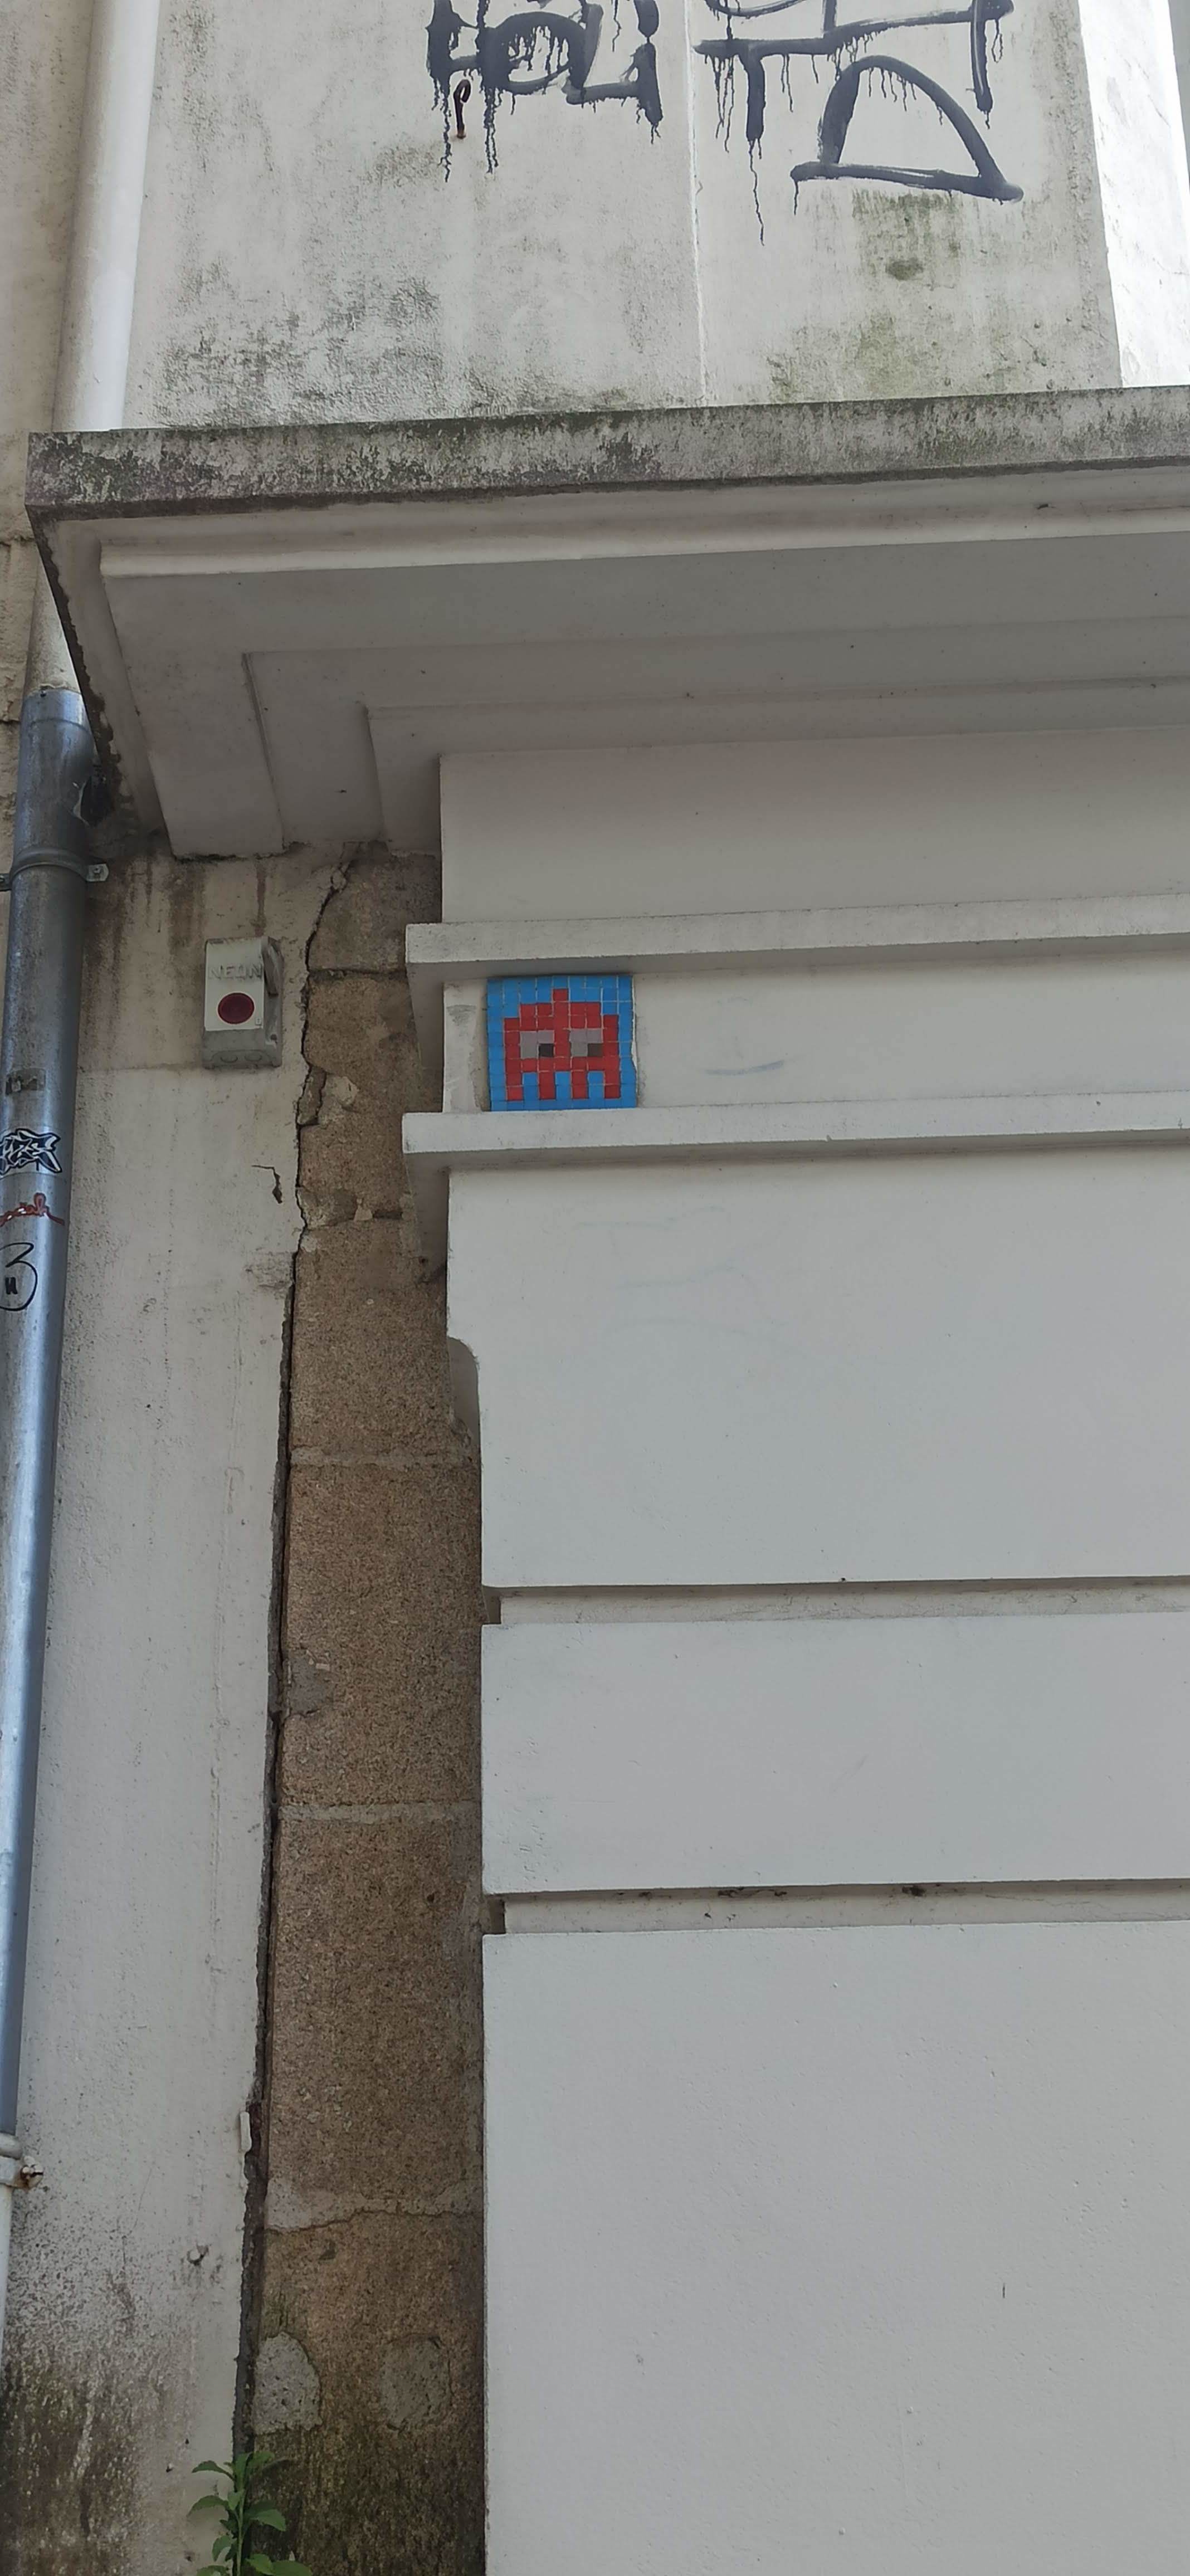 Graffiti 5049  by the artist Invader captured by Rabot in Nantes France